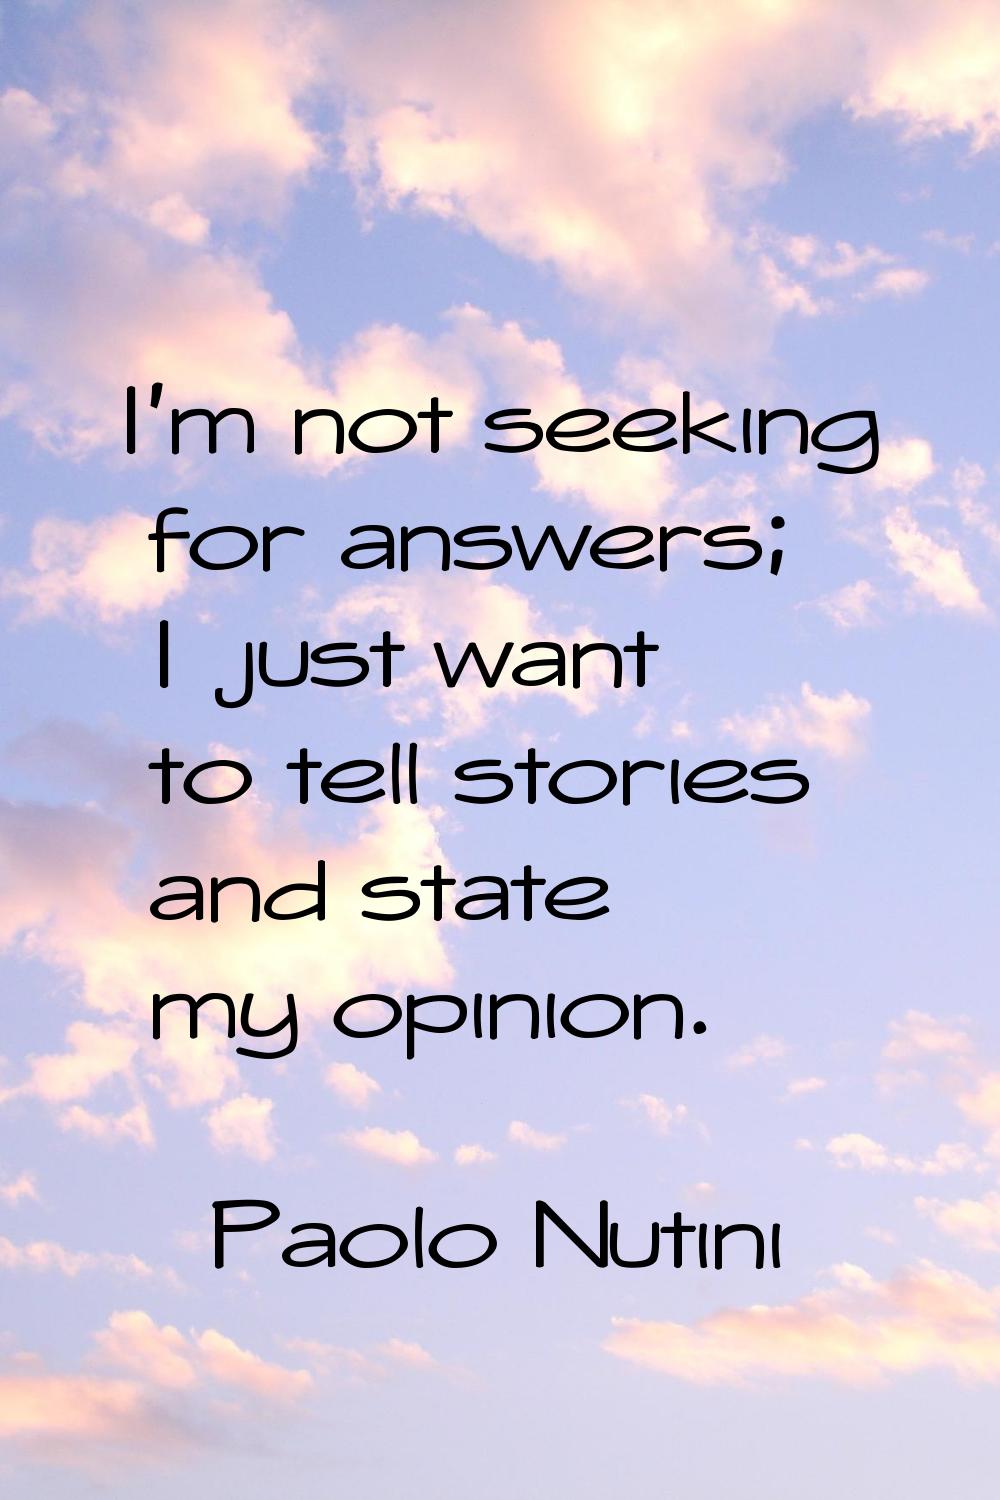 I'm not seeking for answers; I just want to tell stories and state my opinion.